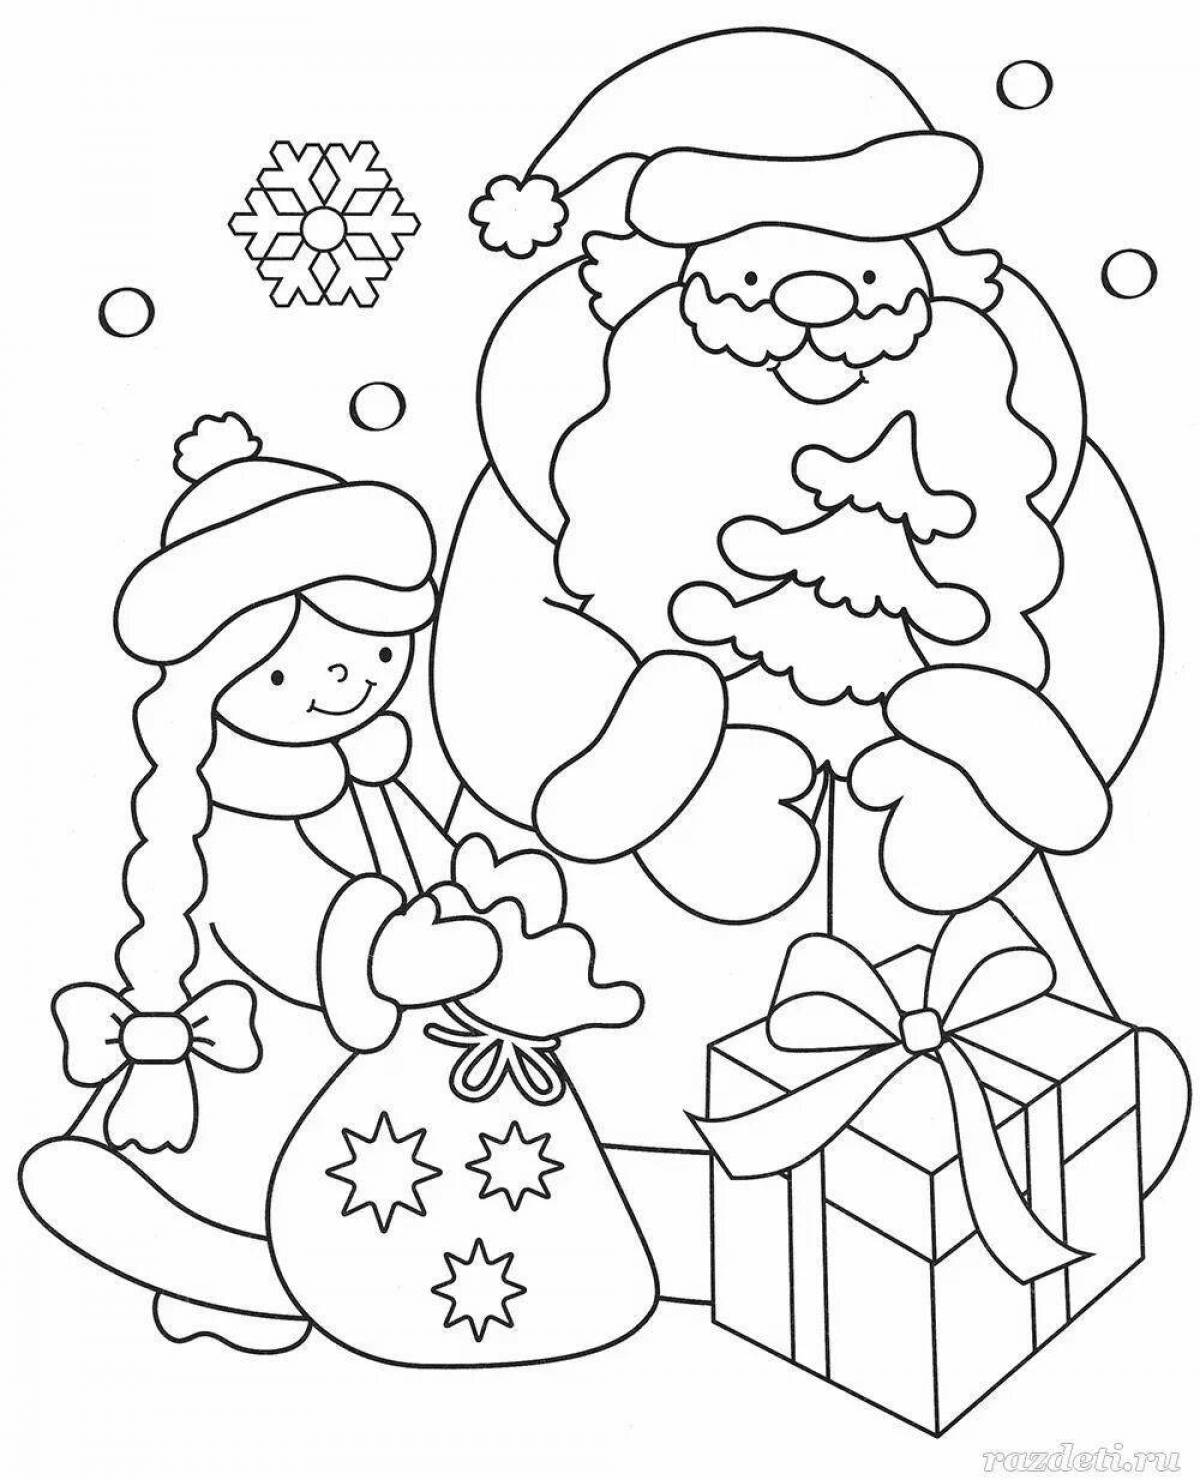 Joyful Christmas coloring book for children 6 years old